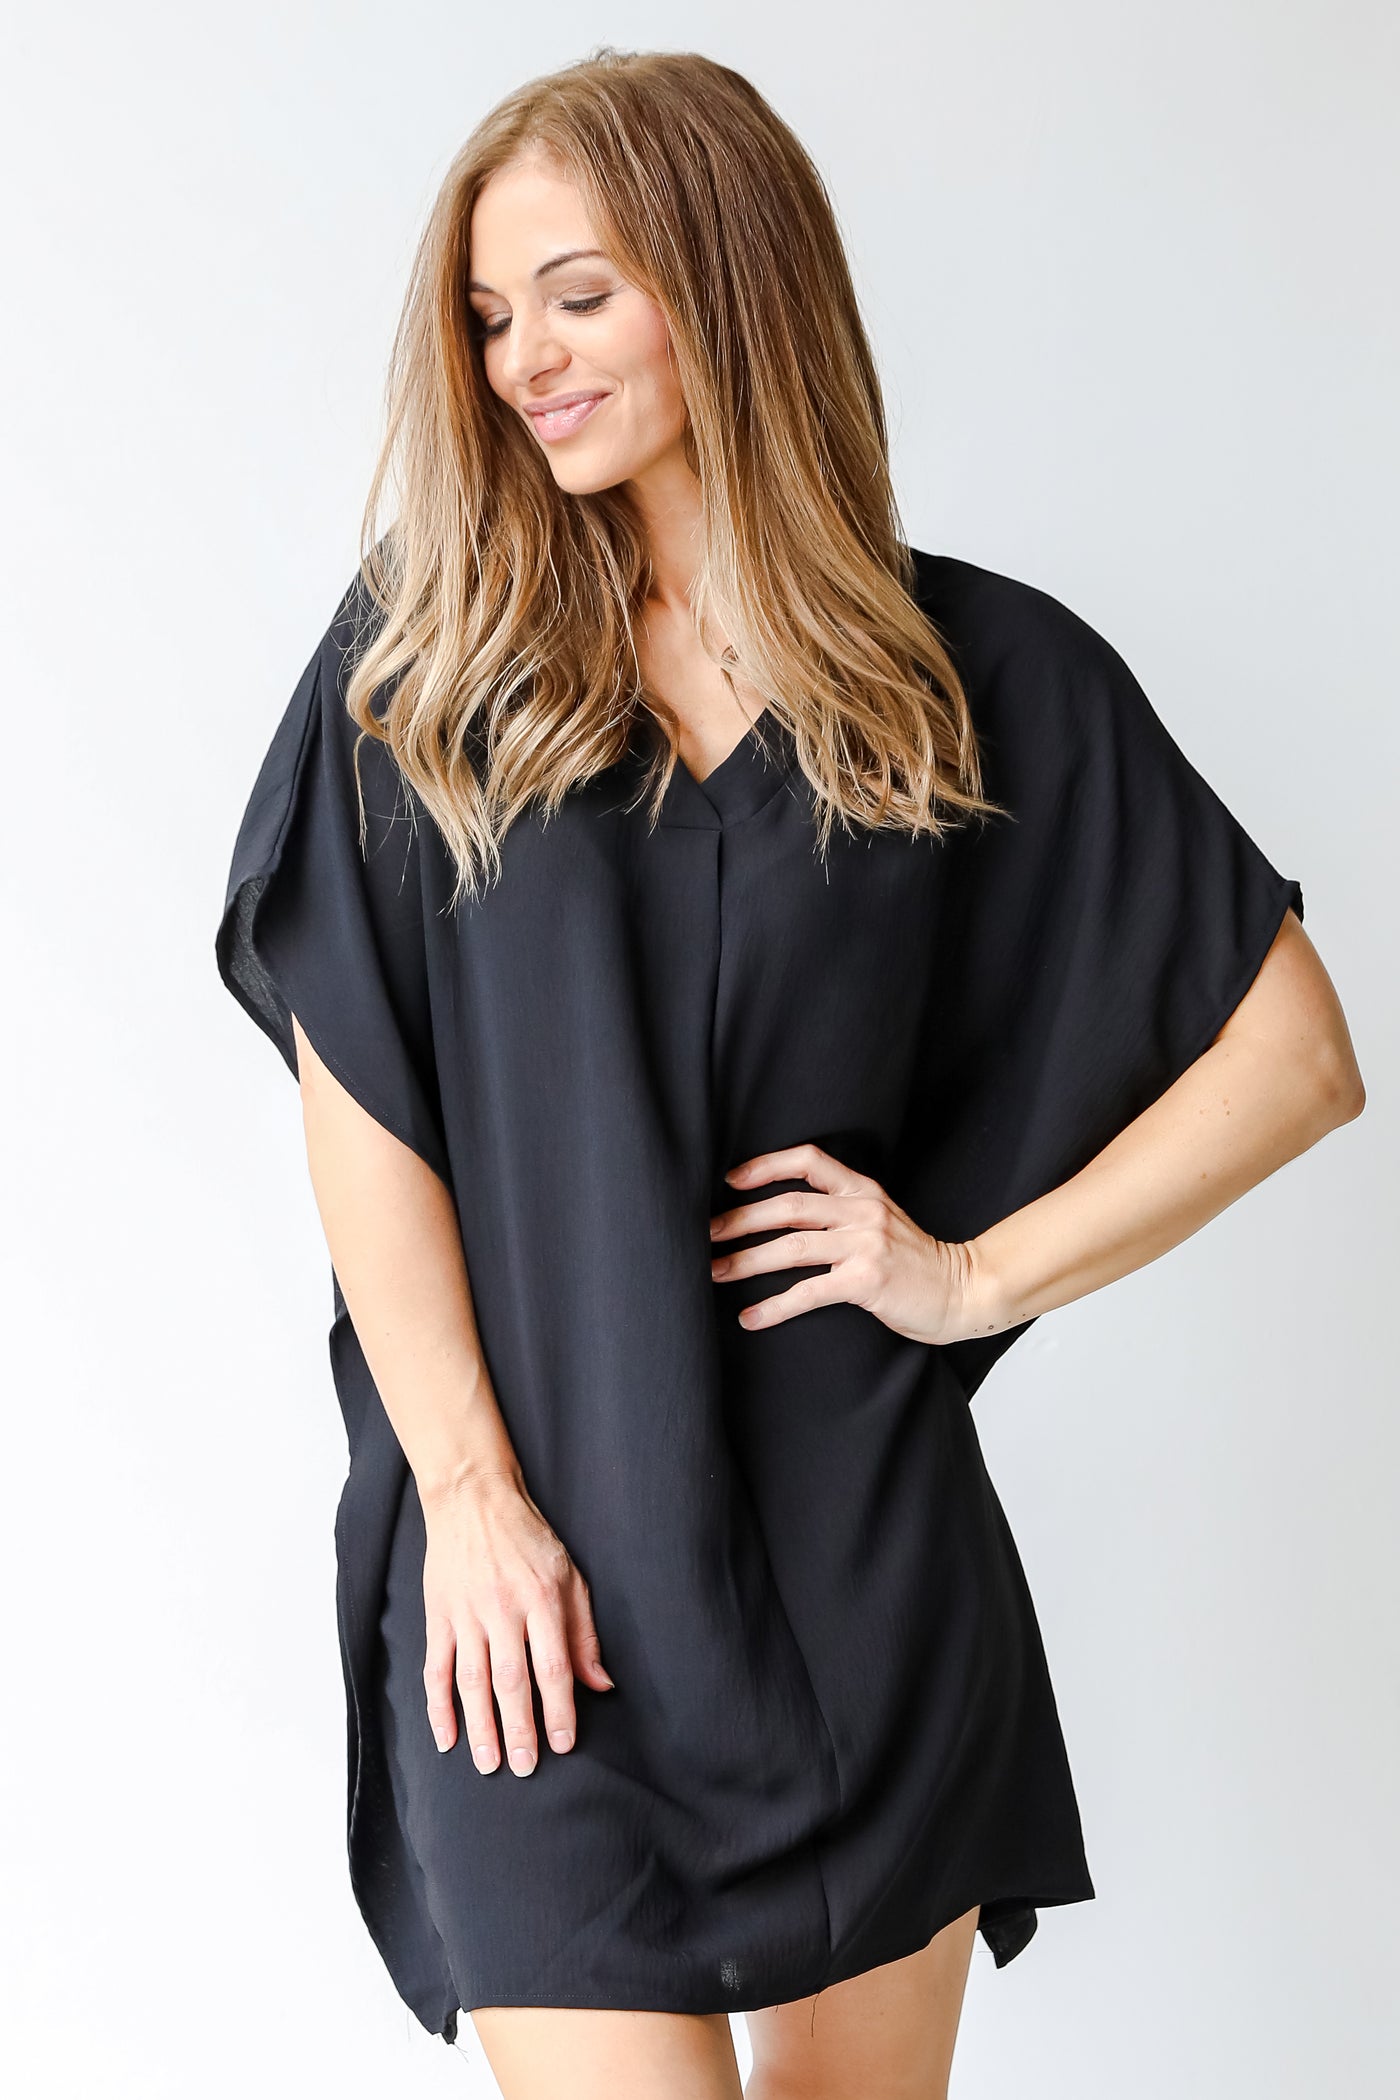 Tunic Dress from dress up